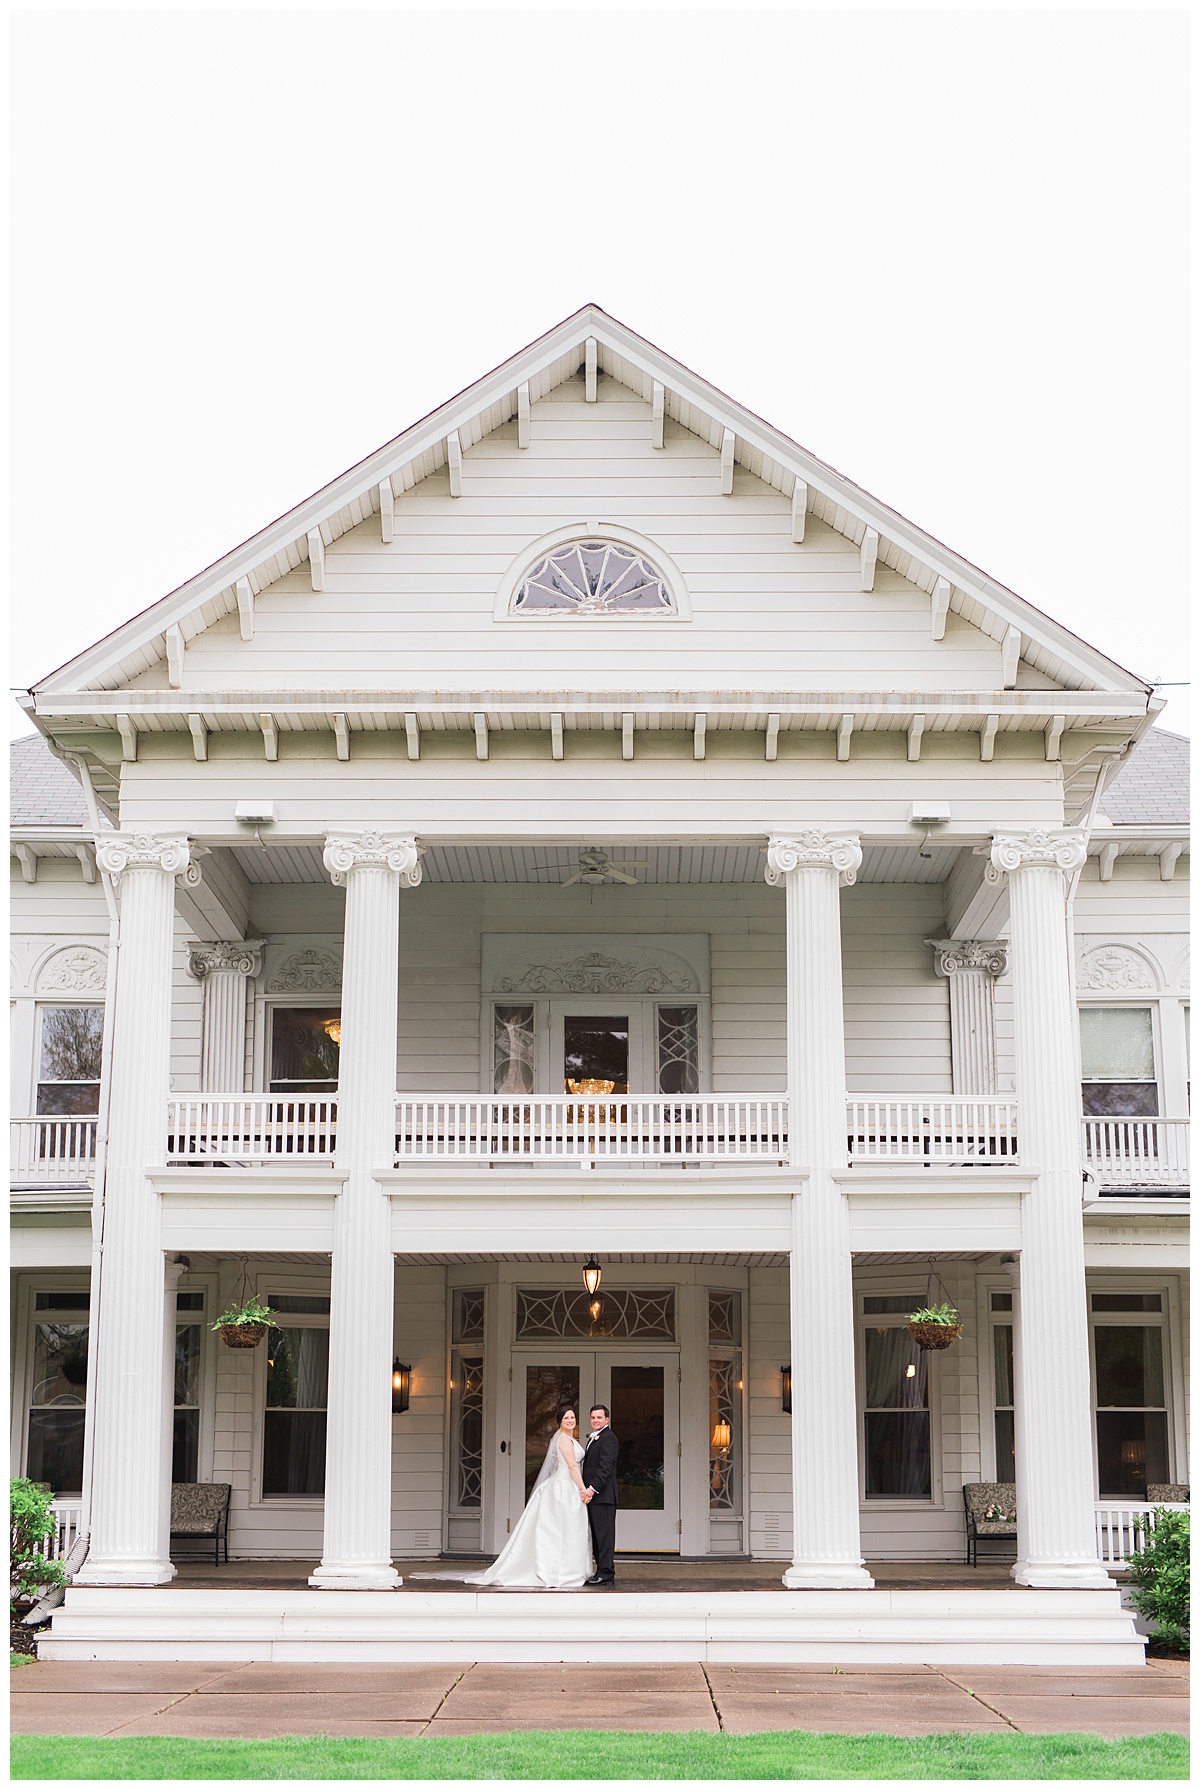 Outing Club Wedding | Wedding Venues in the Quad Cities | Sarah Sunstrom Photography_0005.jpg